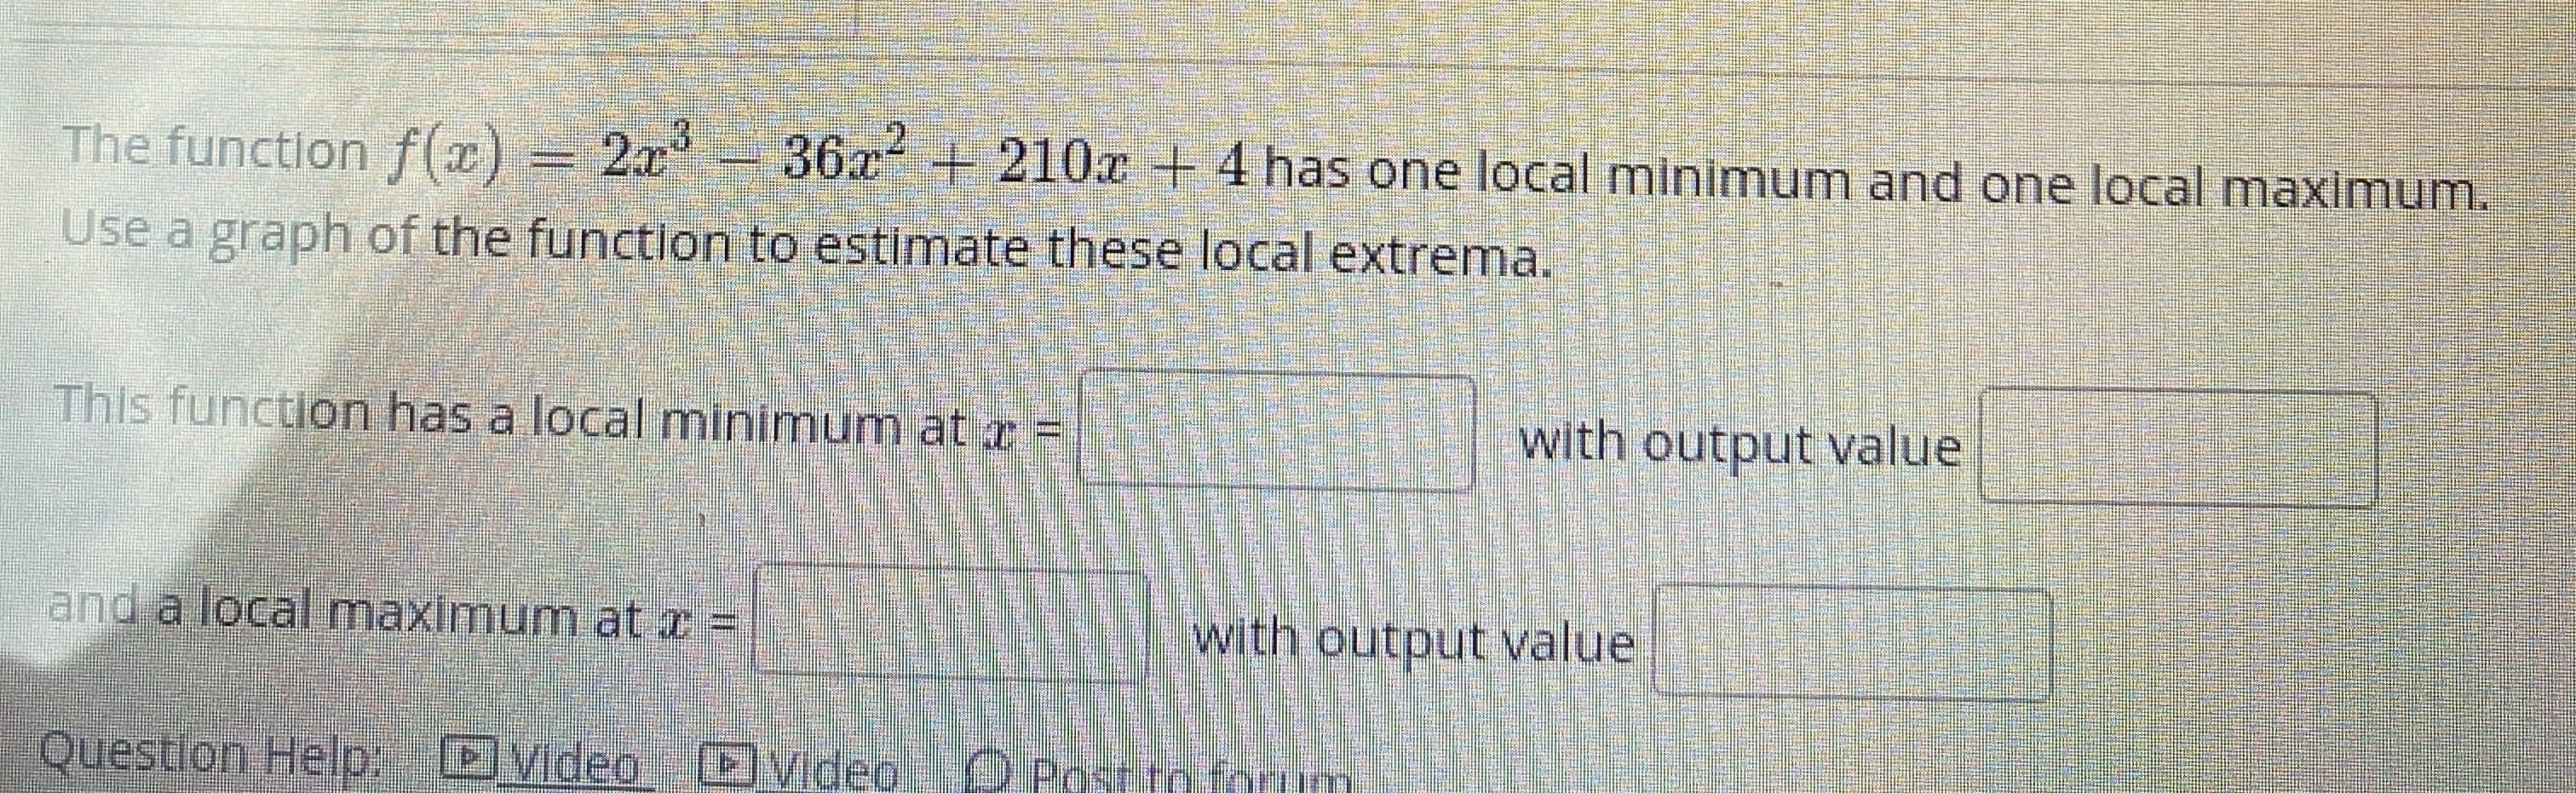 The function f(x) = 2x°-
36x+210x + 4 has one local minimum and one local maximum.
Use a graph of the function to estimate these local extrema.
